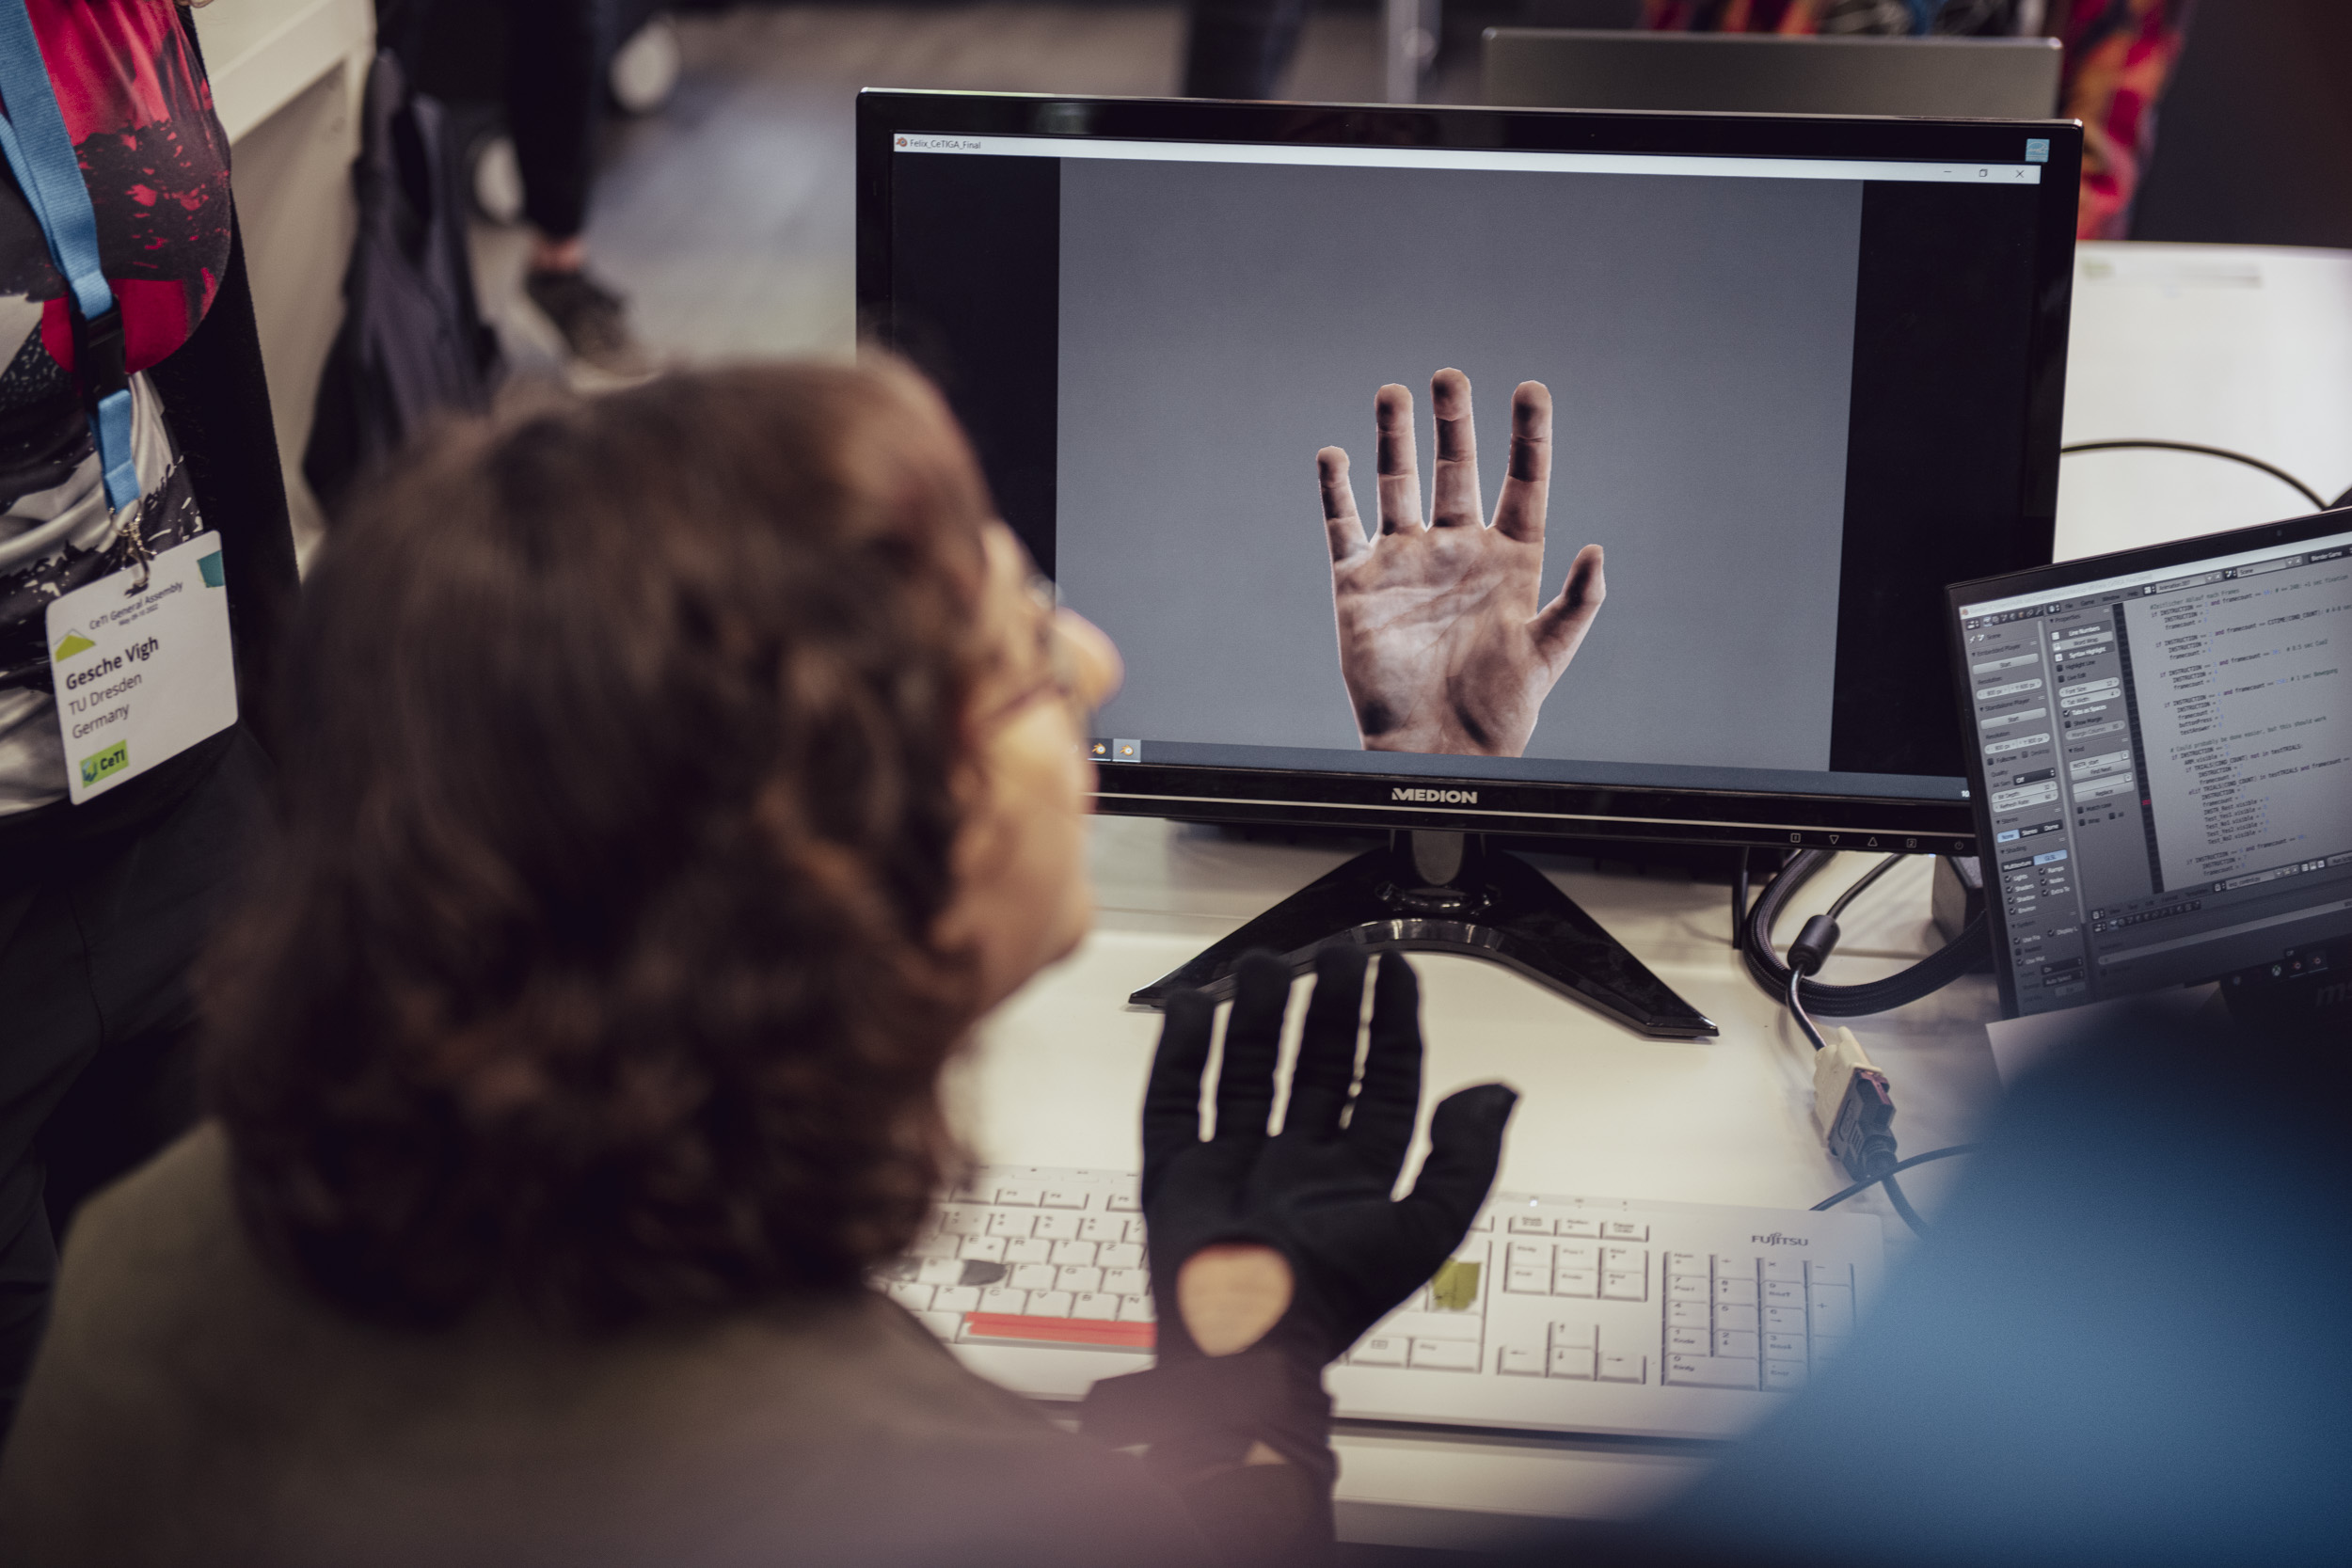 A person wearing a tactile glove and a laptop in front of them that reproduces the person's hand